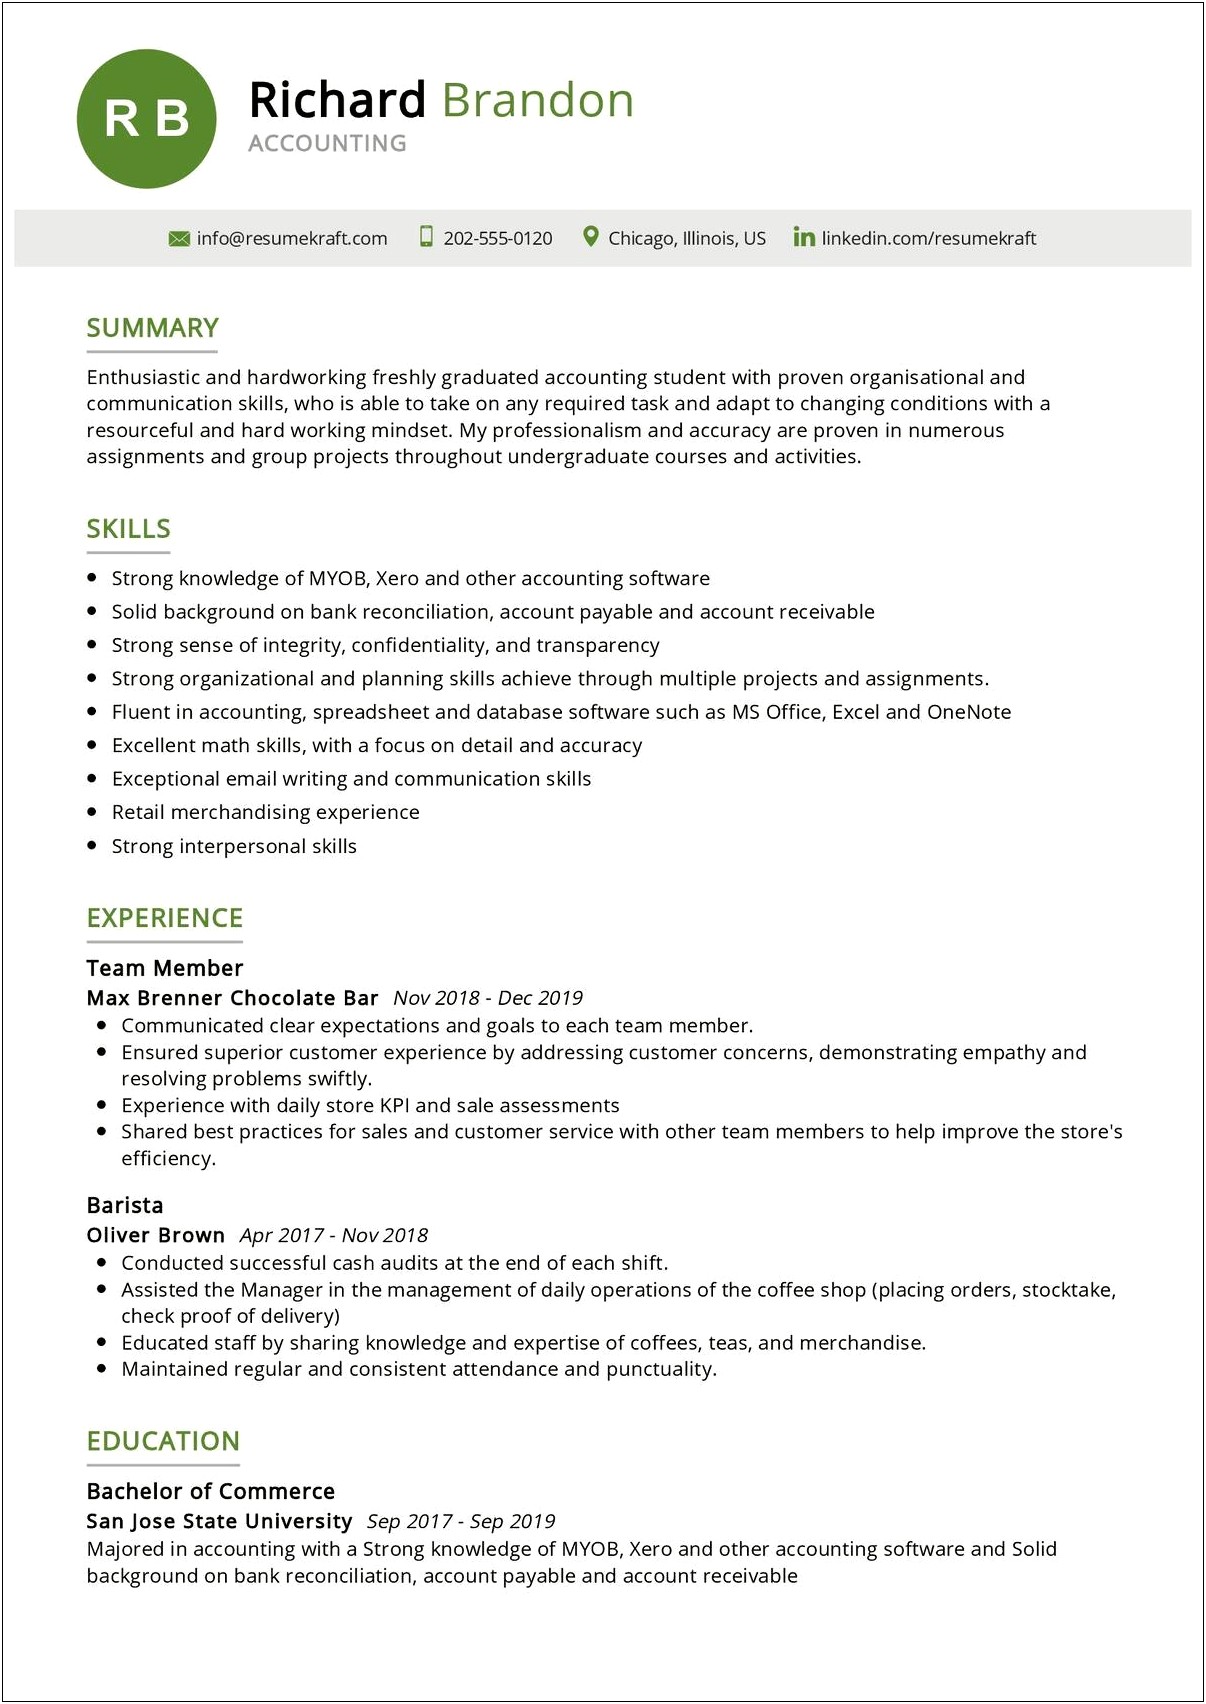 Skills For Accounting Student Resume